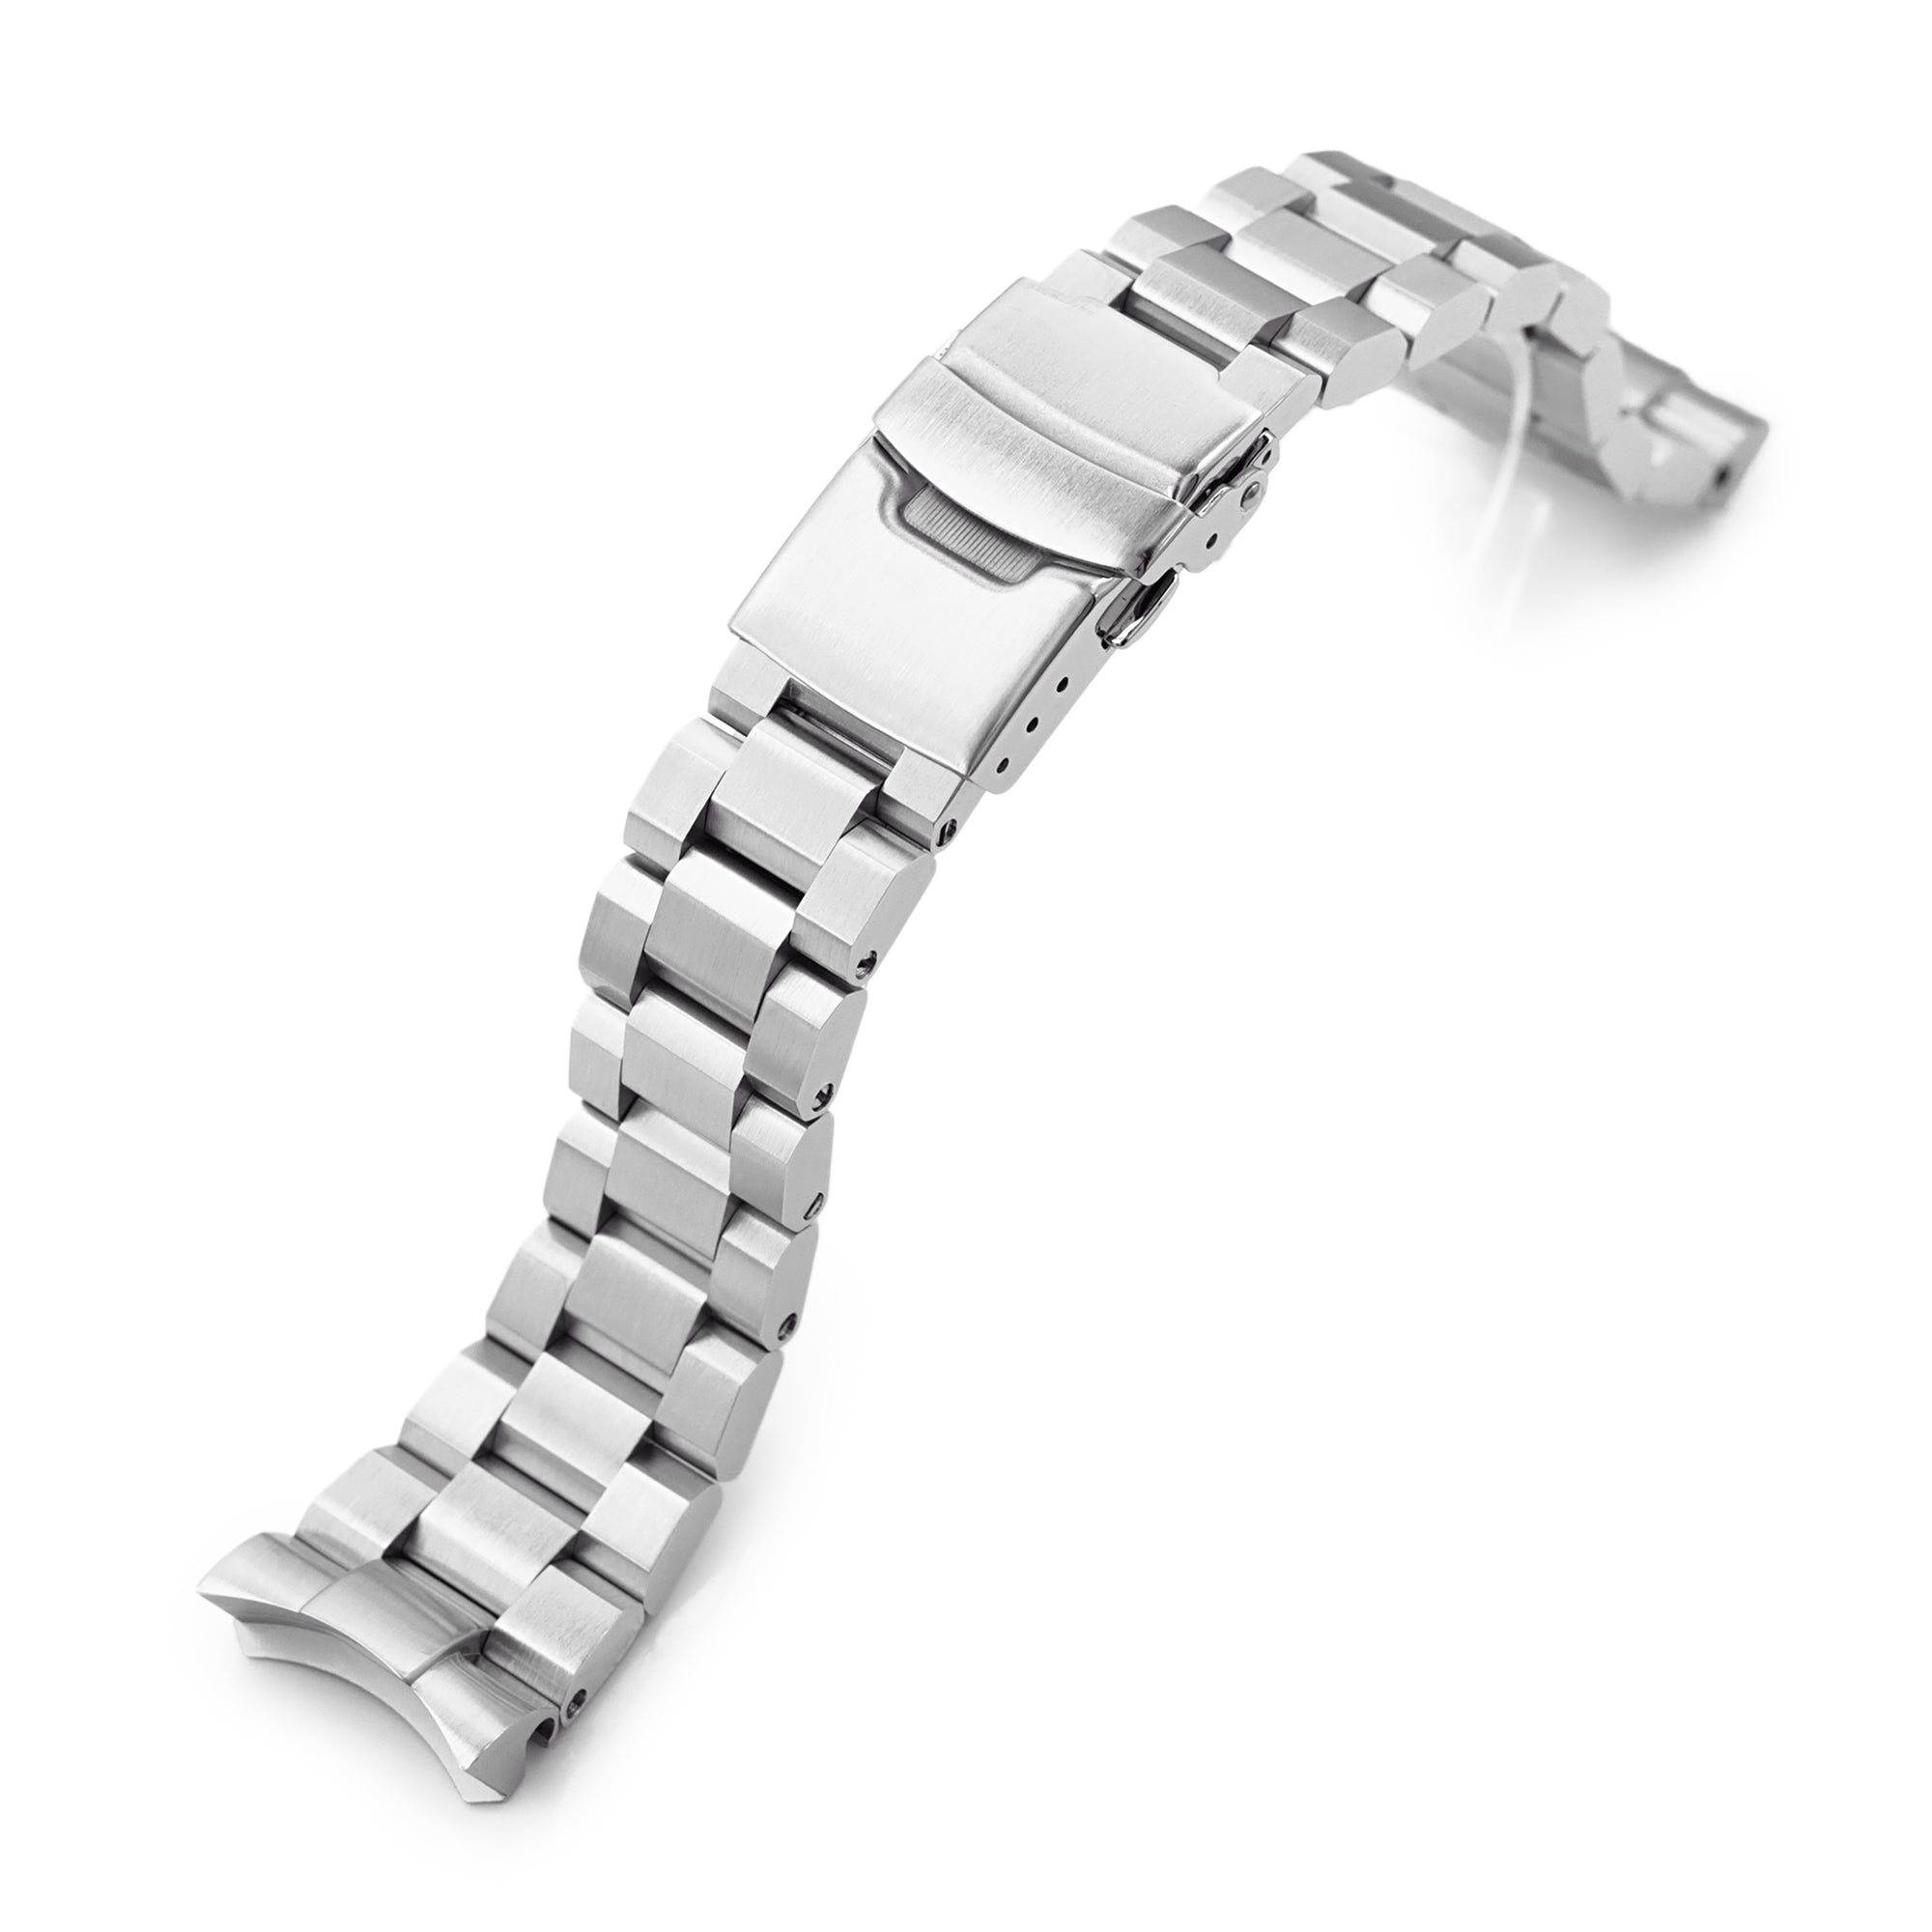 22mm Hexad Watch Band compatible with Seiko SKX007, 316L Stainless Steel Brushed Diver Clasp Strapcode Watch Bands